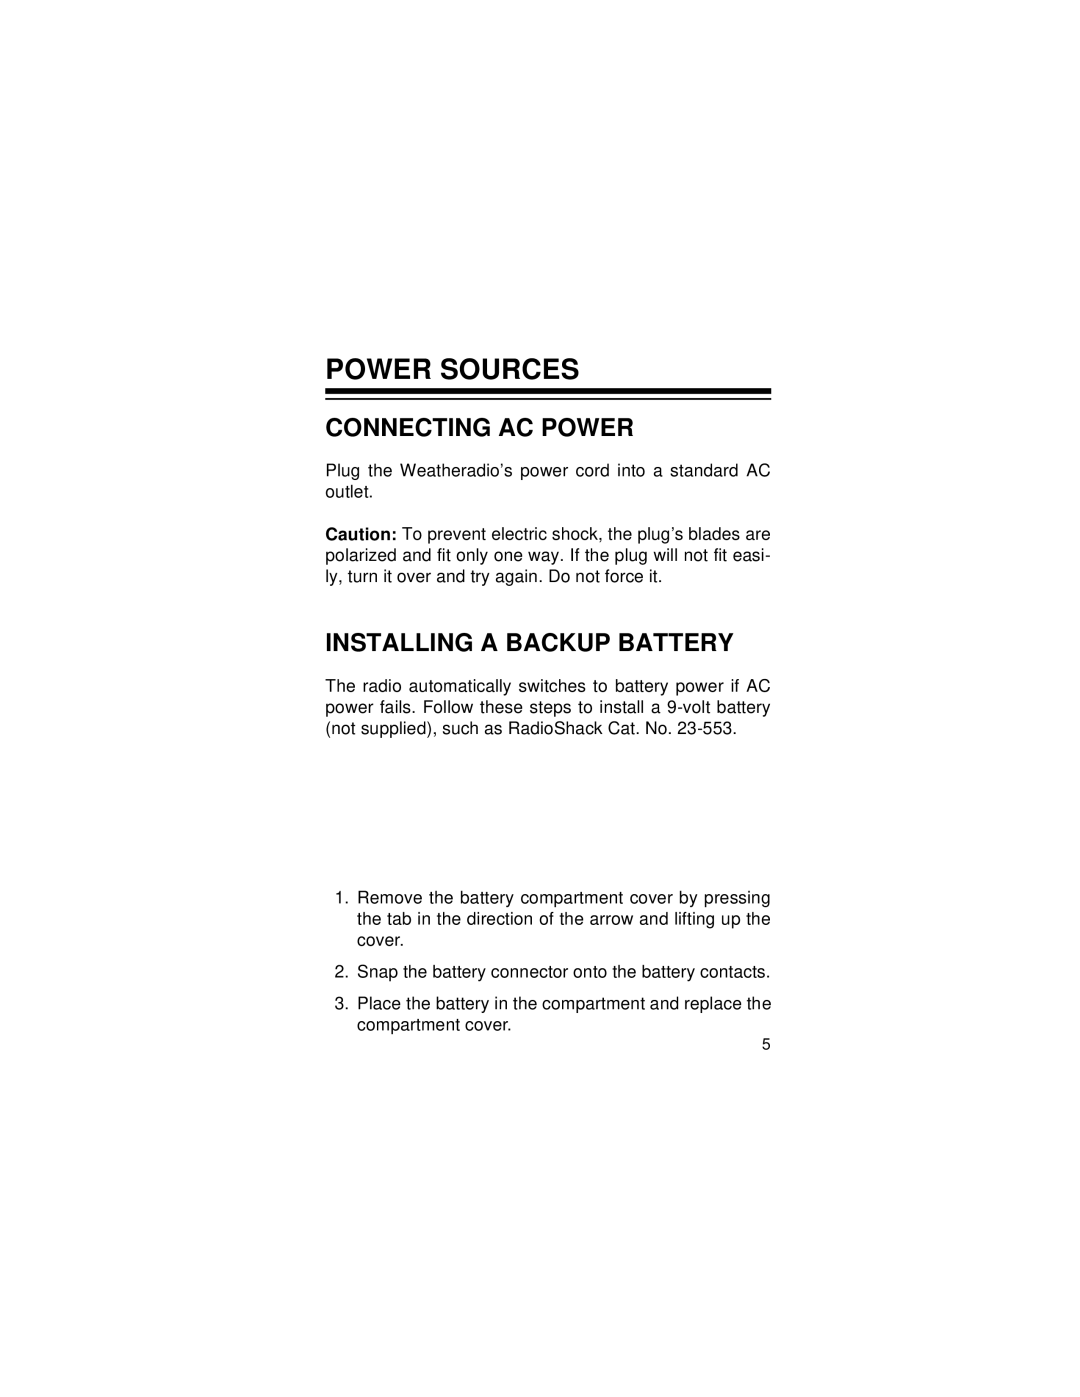 Radio Shack 12-240 owner manual Power Sources, Connecting Ac Power, Installing A Backup Battery 